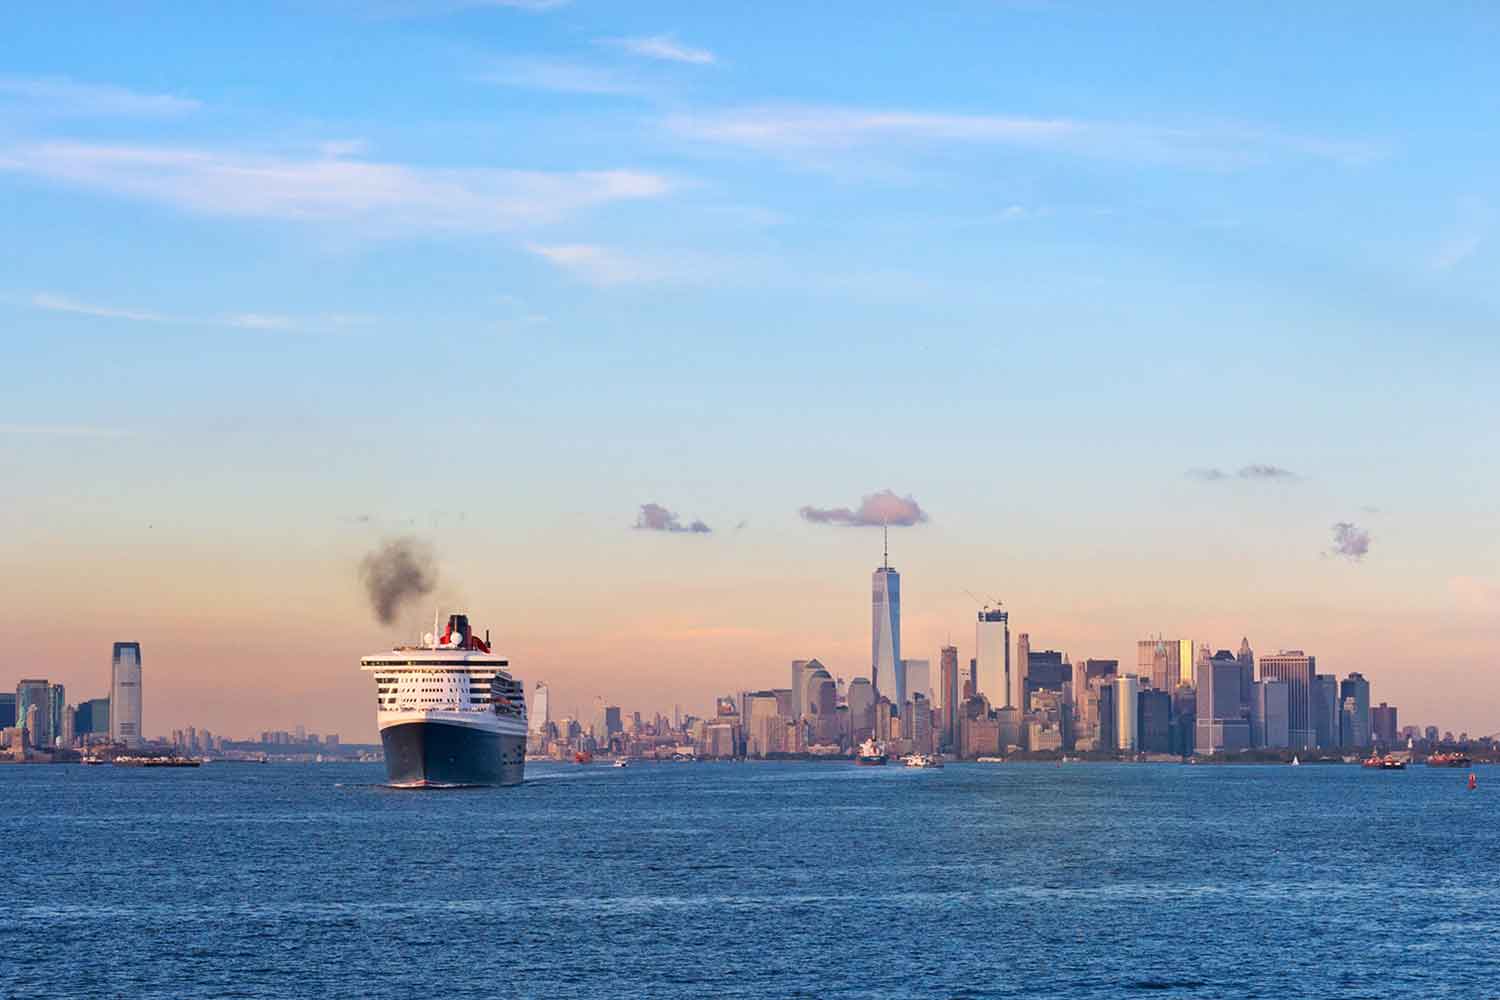 Cruise ship heading to the skyline of New York in the distance